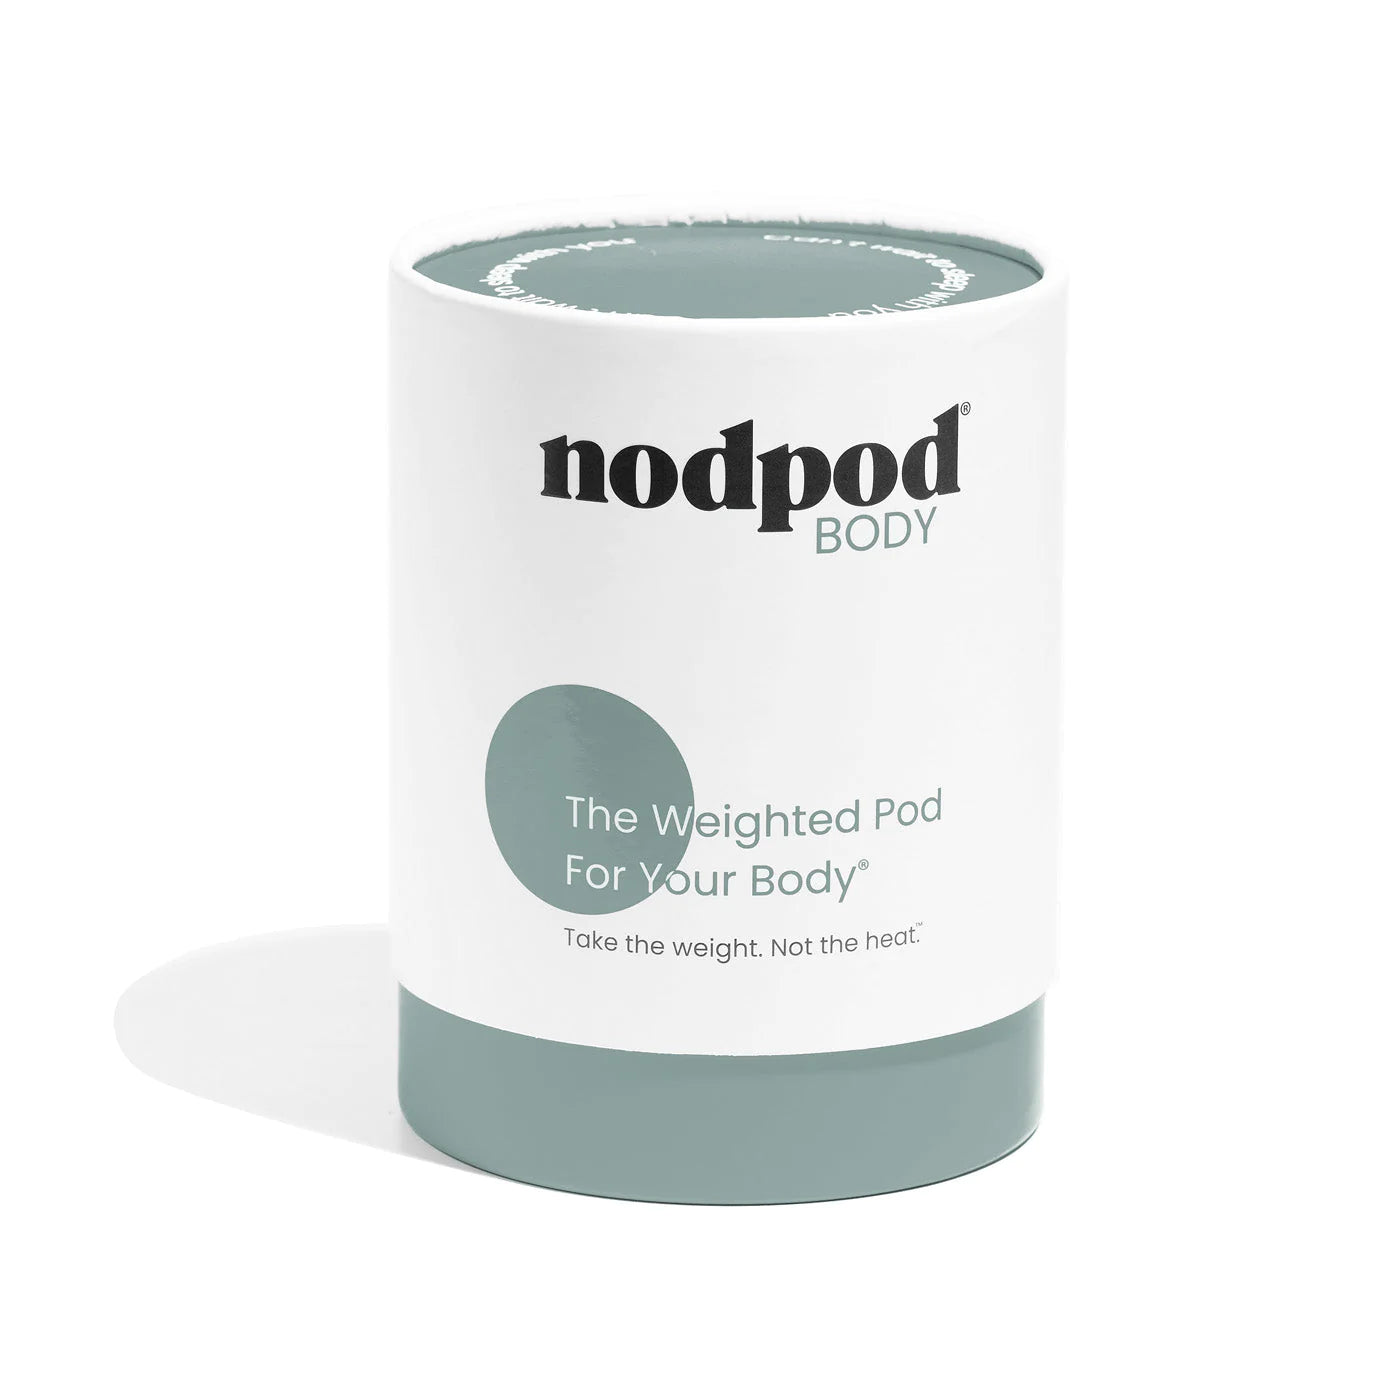 Nodpod Body The Weighted Pod for Your Body weighted blanket sage 